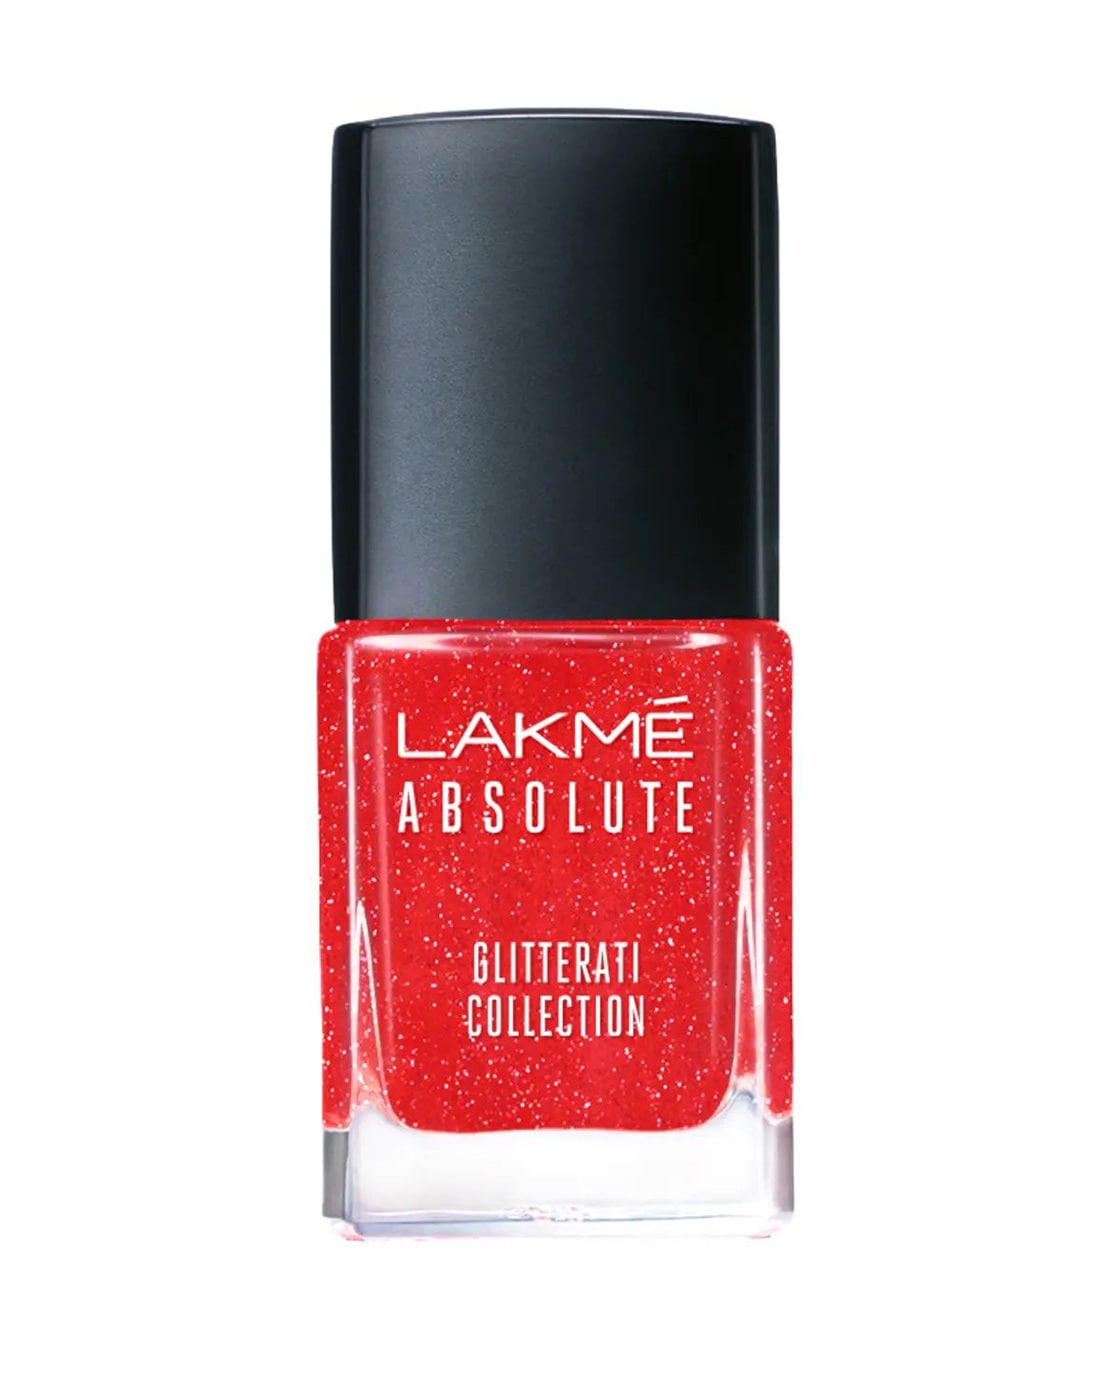 On my nails this week – Lakme Absolute Gel Stylist Nail Pain in Coral Rush  | Blushes & Sparkle